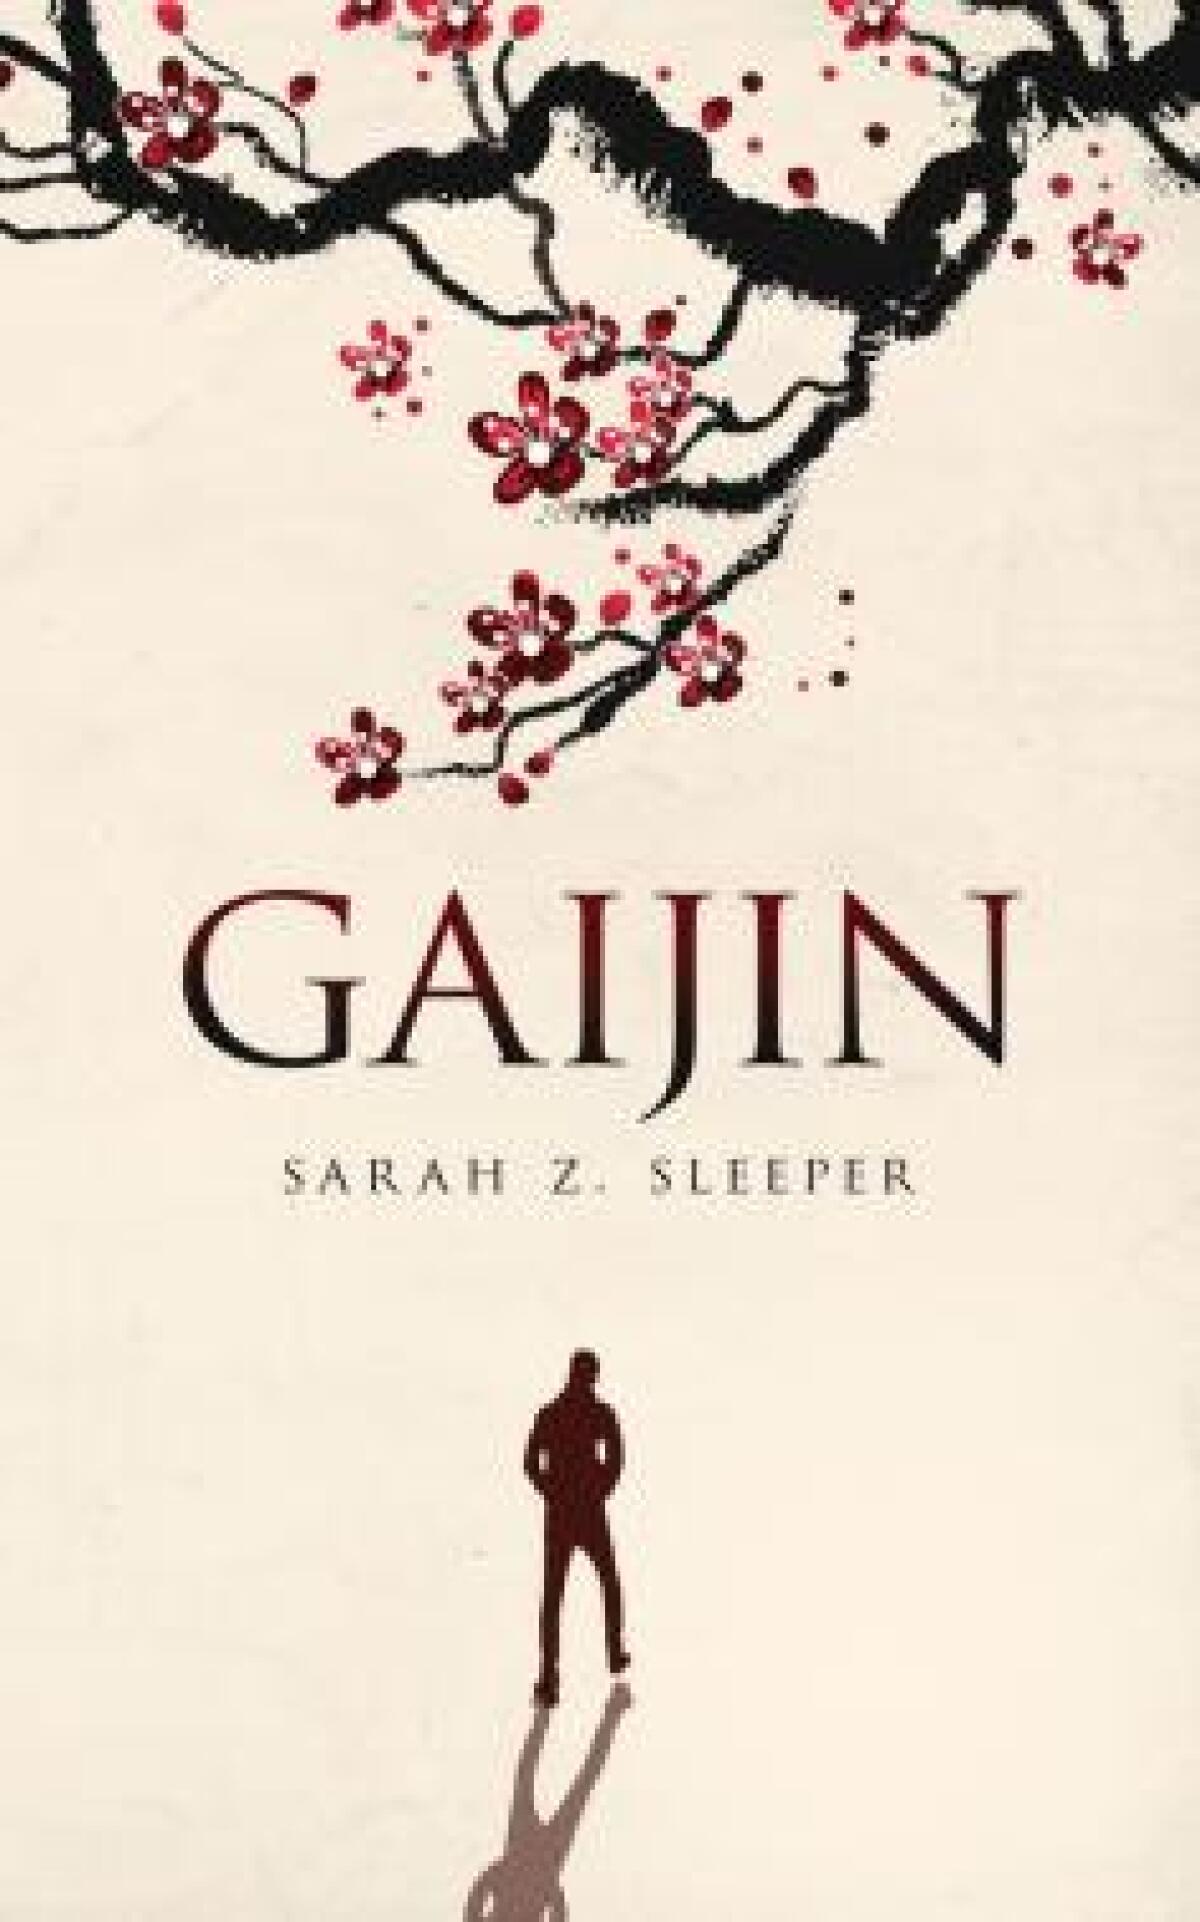 The cover of "Gaijin" by Sarah Z. Sleeper